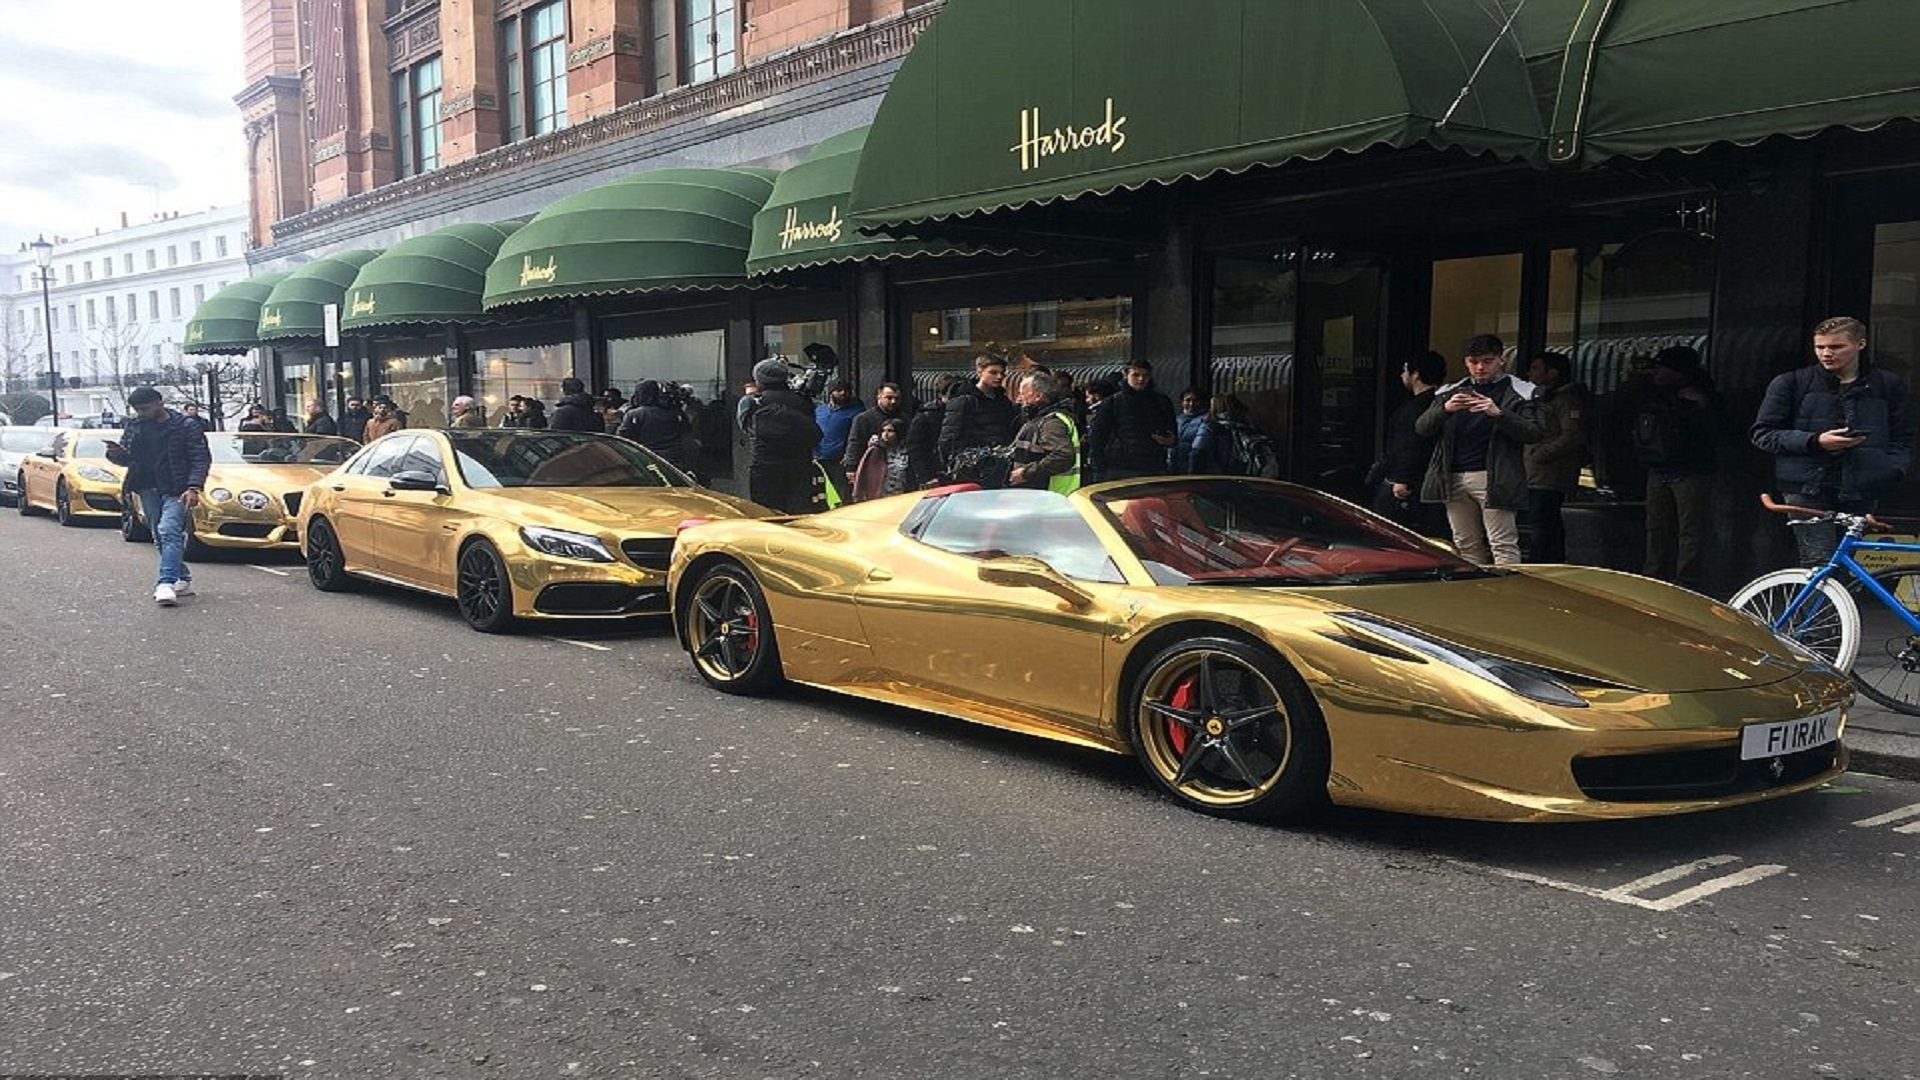 Expensive gold. The expensive and Lux car in the World. Luxs London.